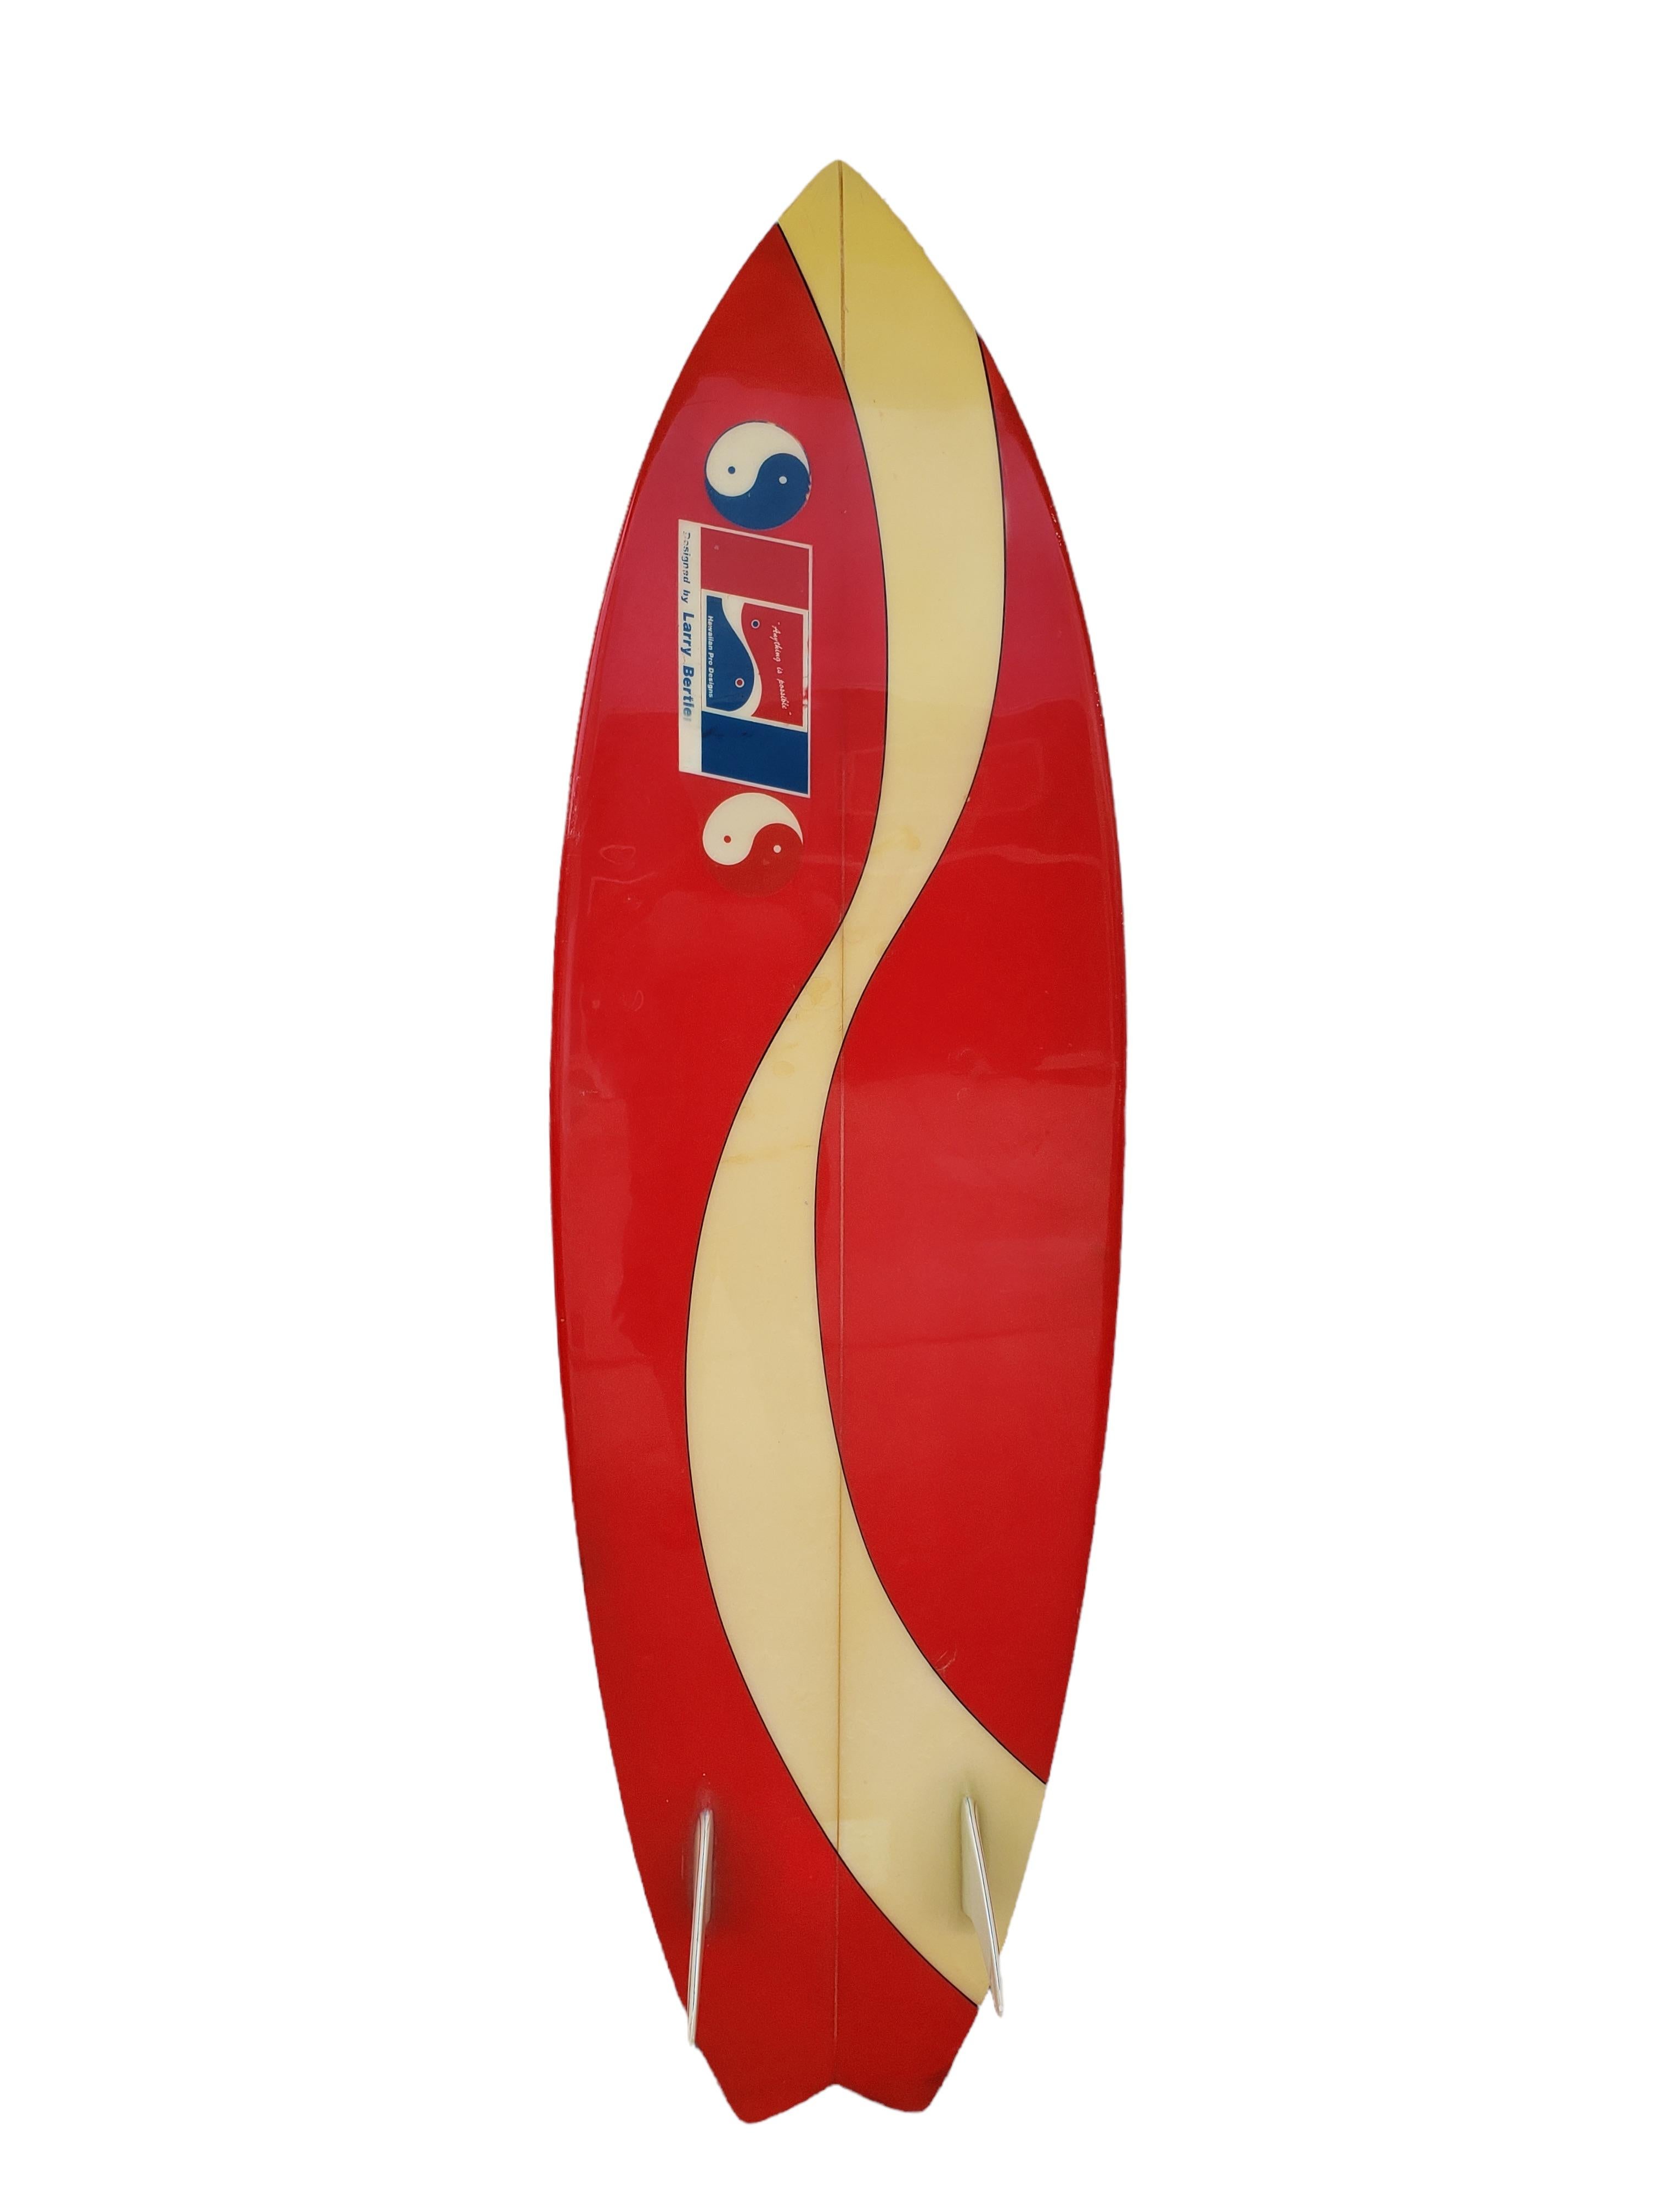 Vintage 1970s Town and Country twin fin shortboard hand shaped by Larry Bertlemann. Features a gorgeous red tint with classic swirl pattern and unique pinstriping on the twin fins. Hand signed “LB” on the foam which indicates this board was hand